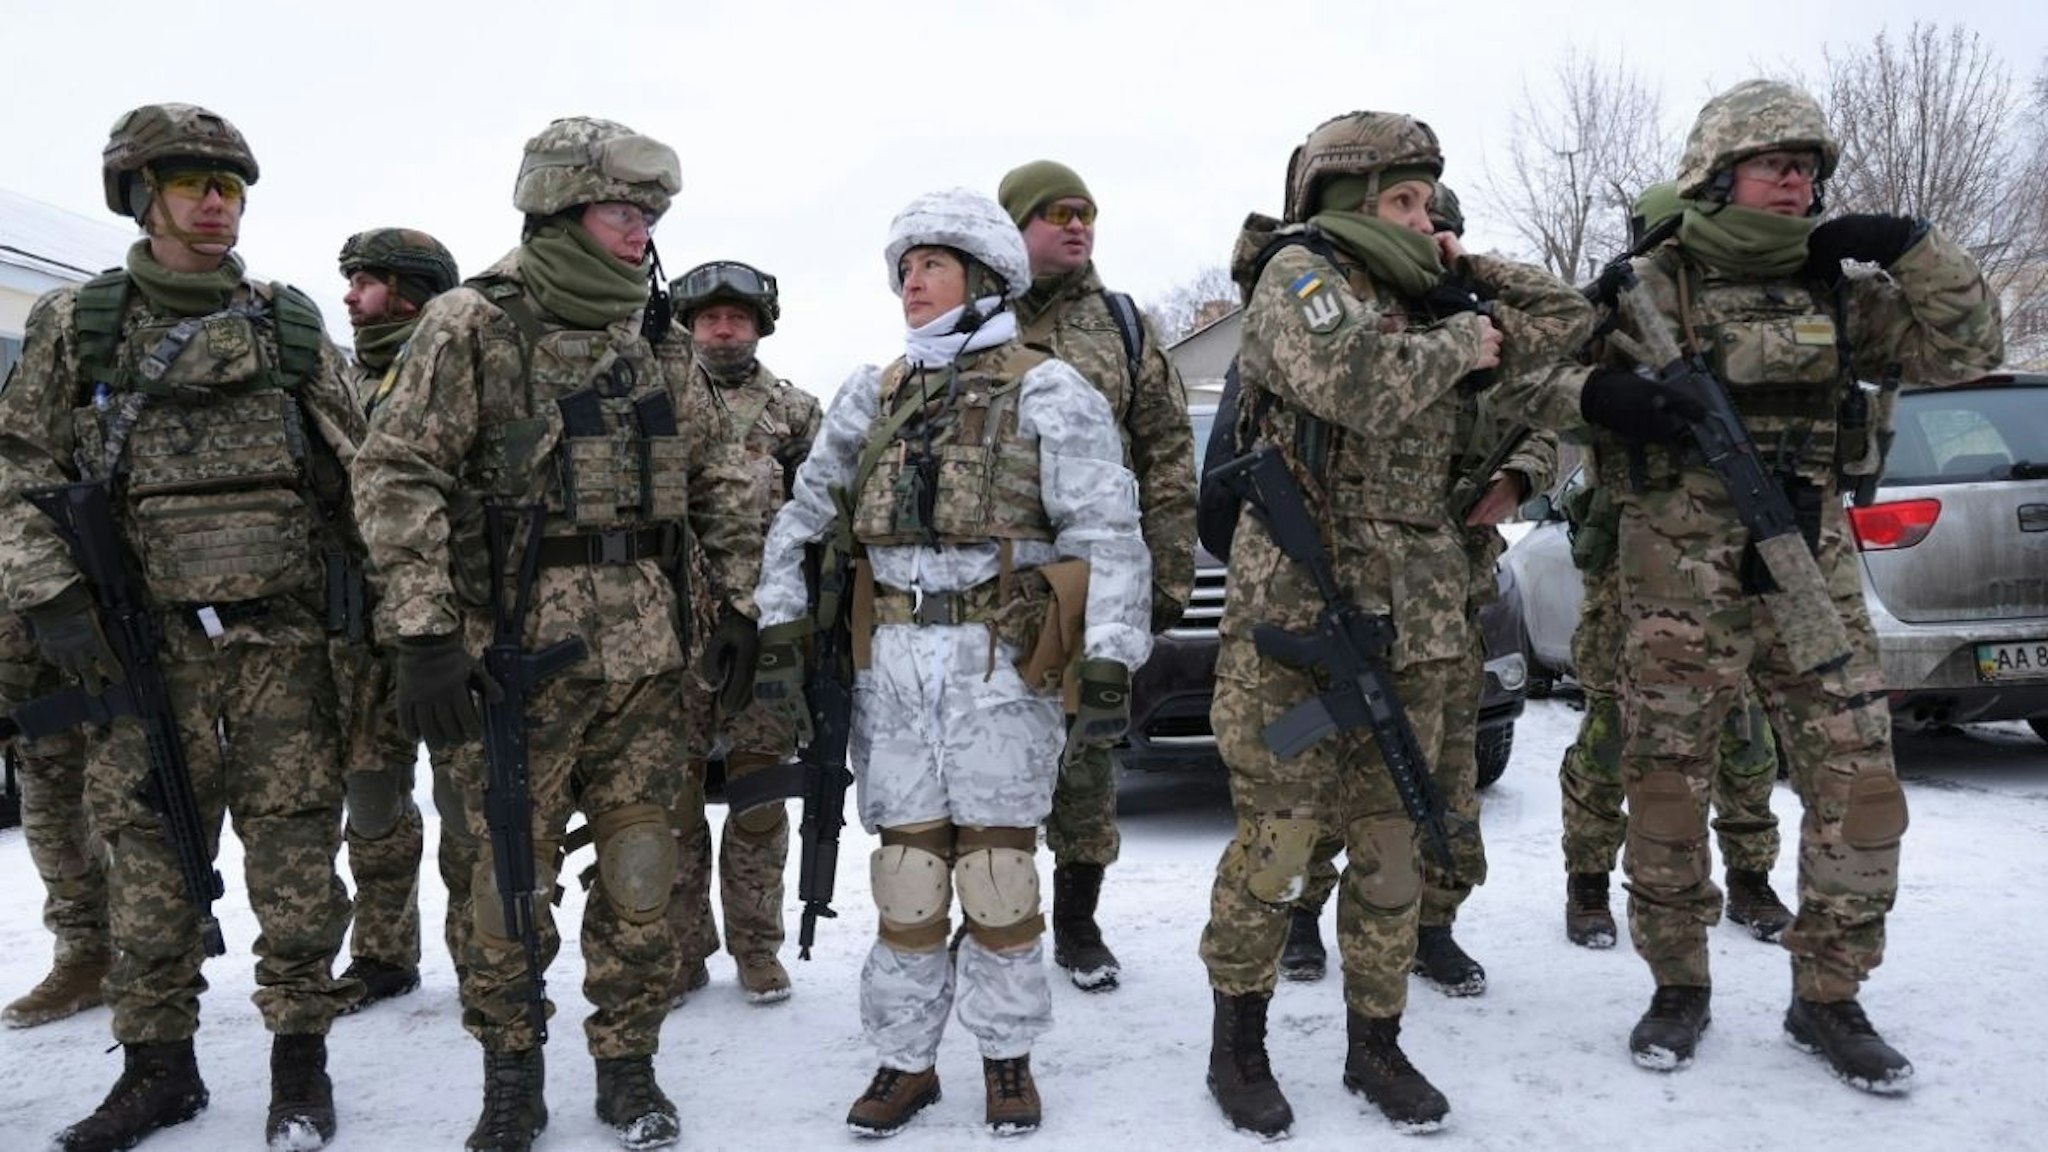 Civilian participants in a Kyiv Territorial Defence unit, including Mariana (C), 52, a marketing researcher, arrive to train on a Saturday in a forest on January 22, 2022 in Kyiv, Ukraine.